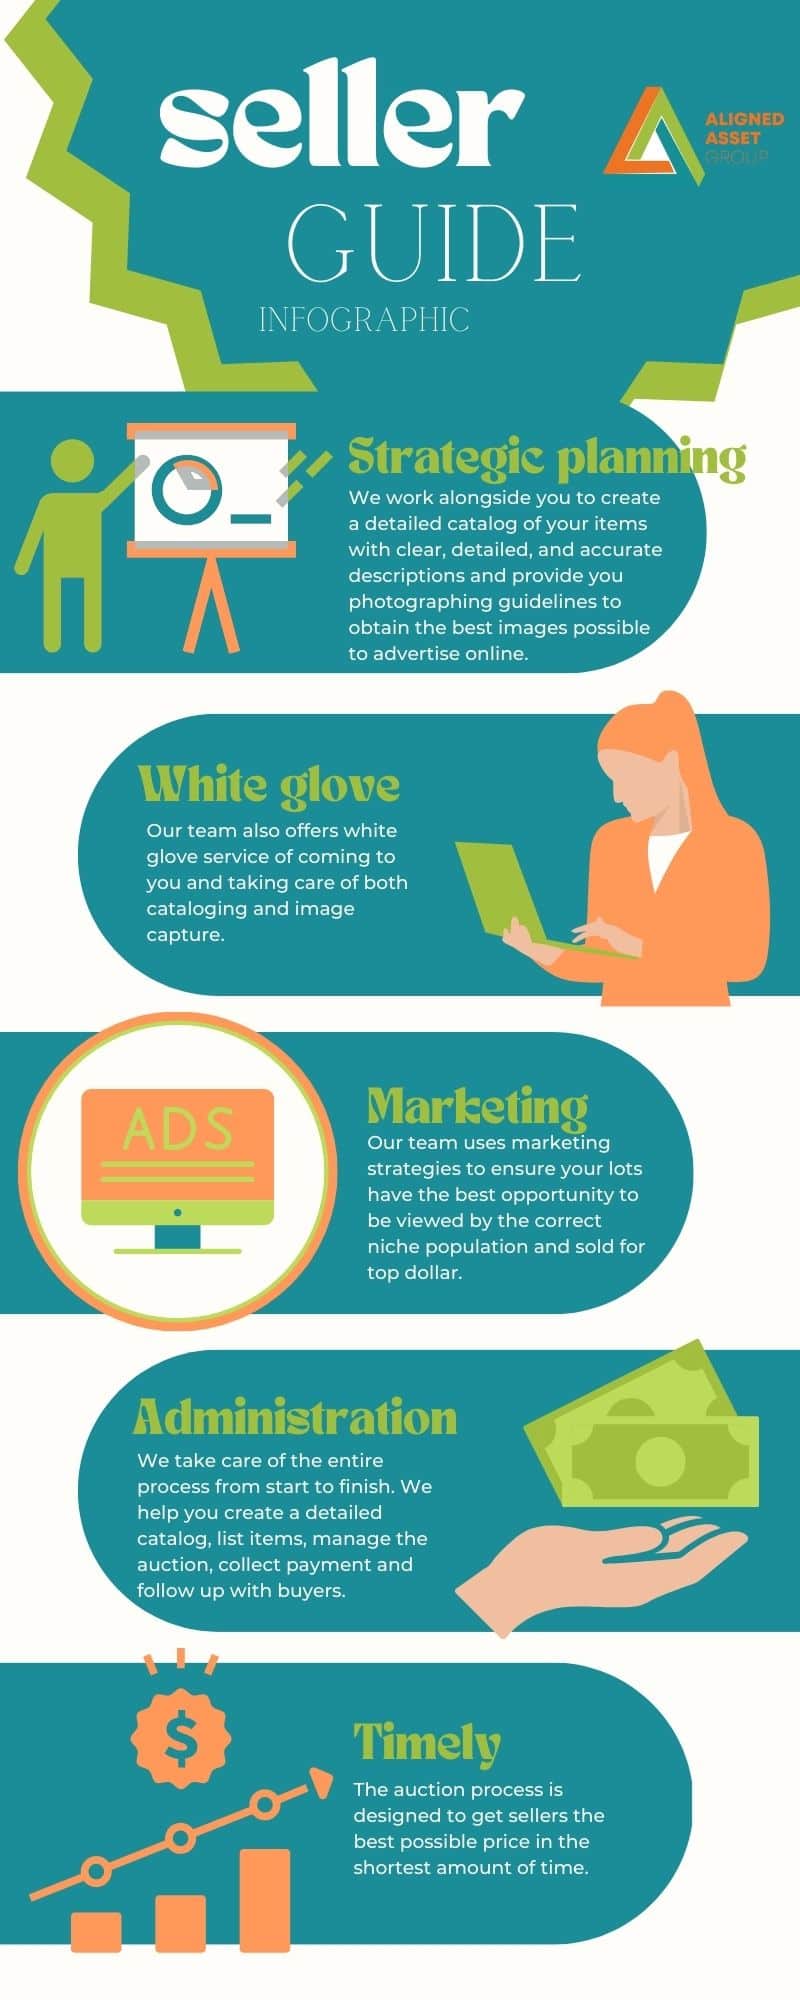 infographic on information about selling items at an auction